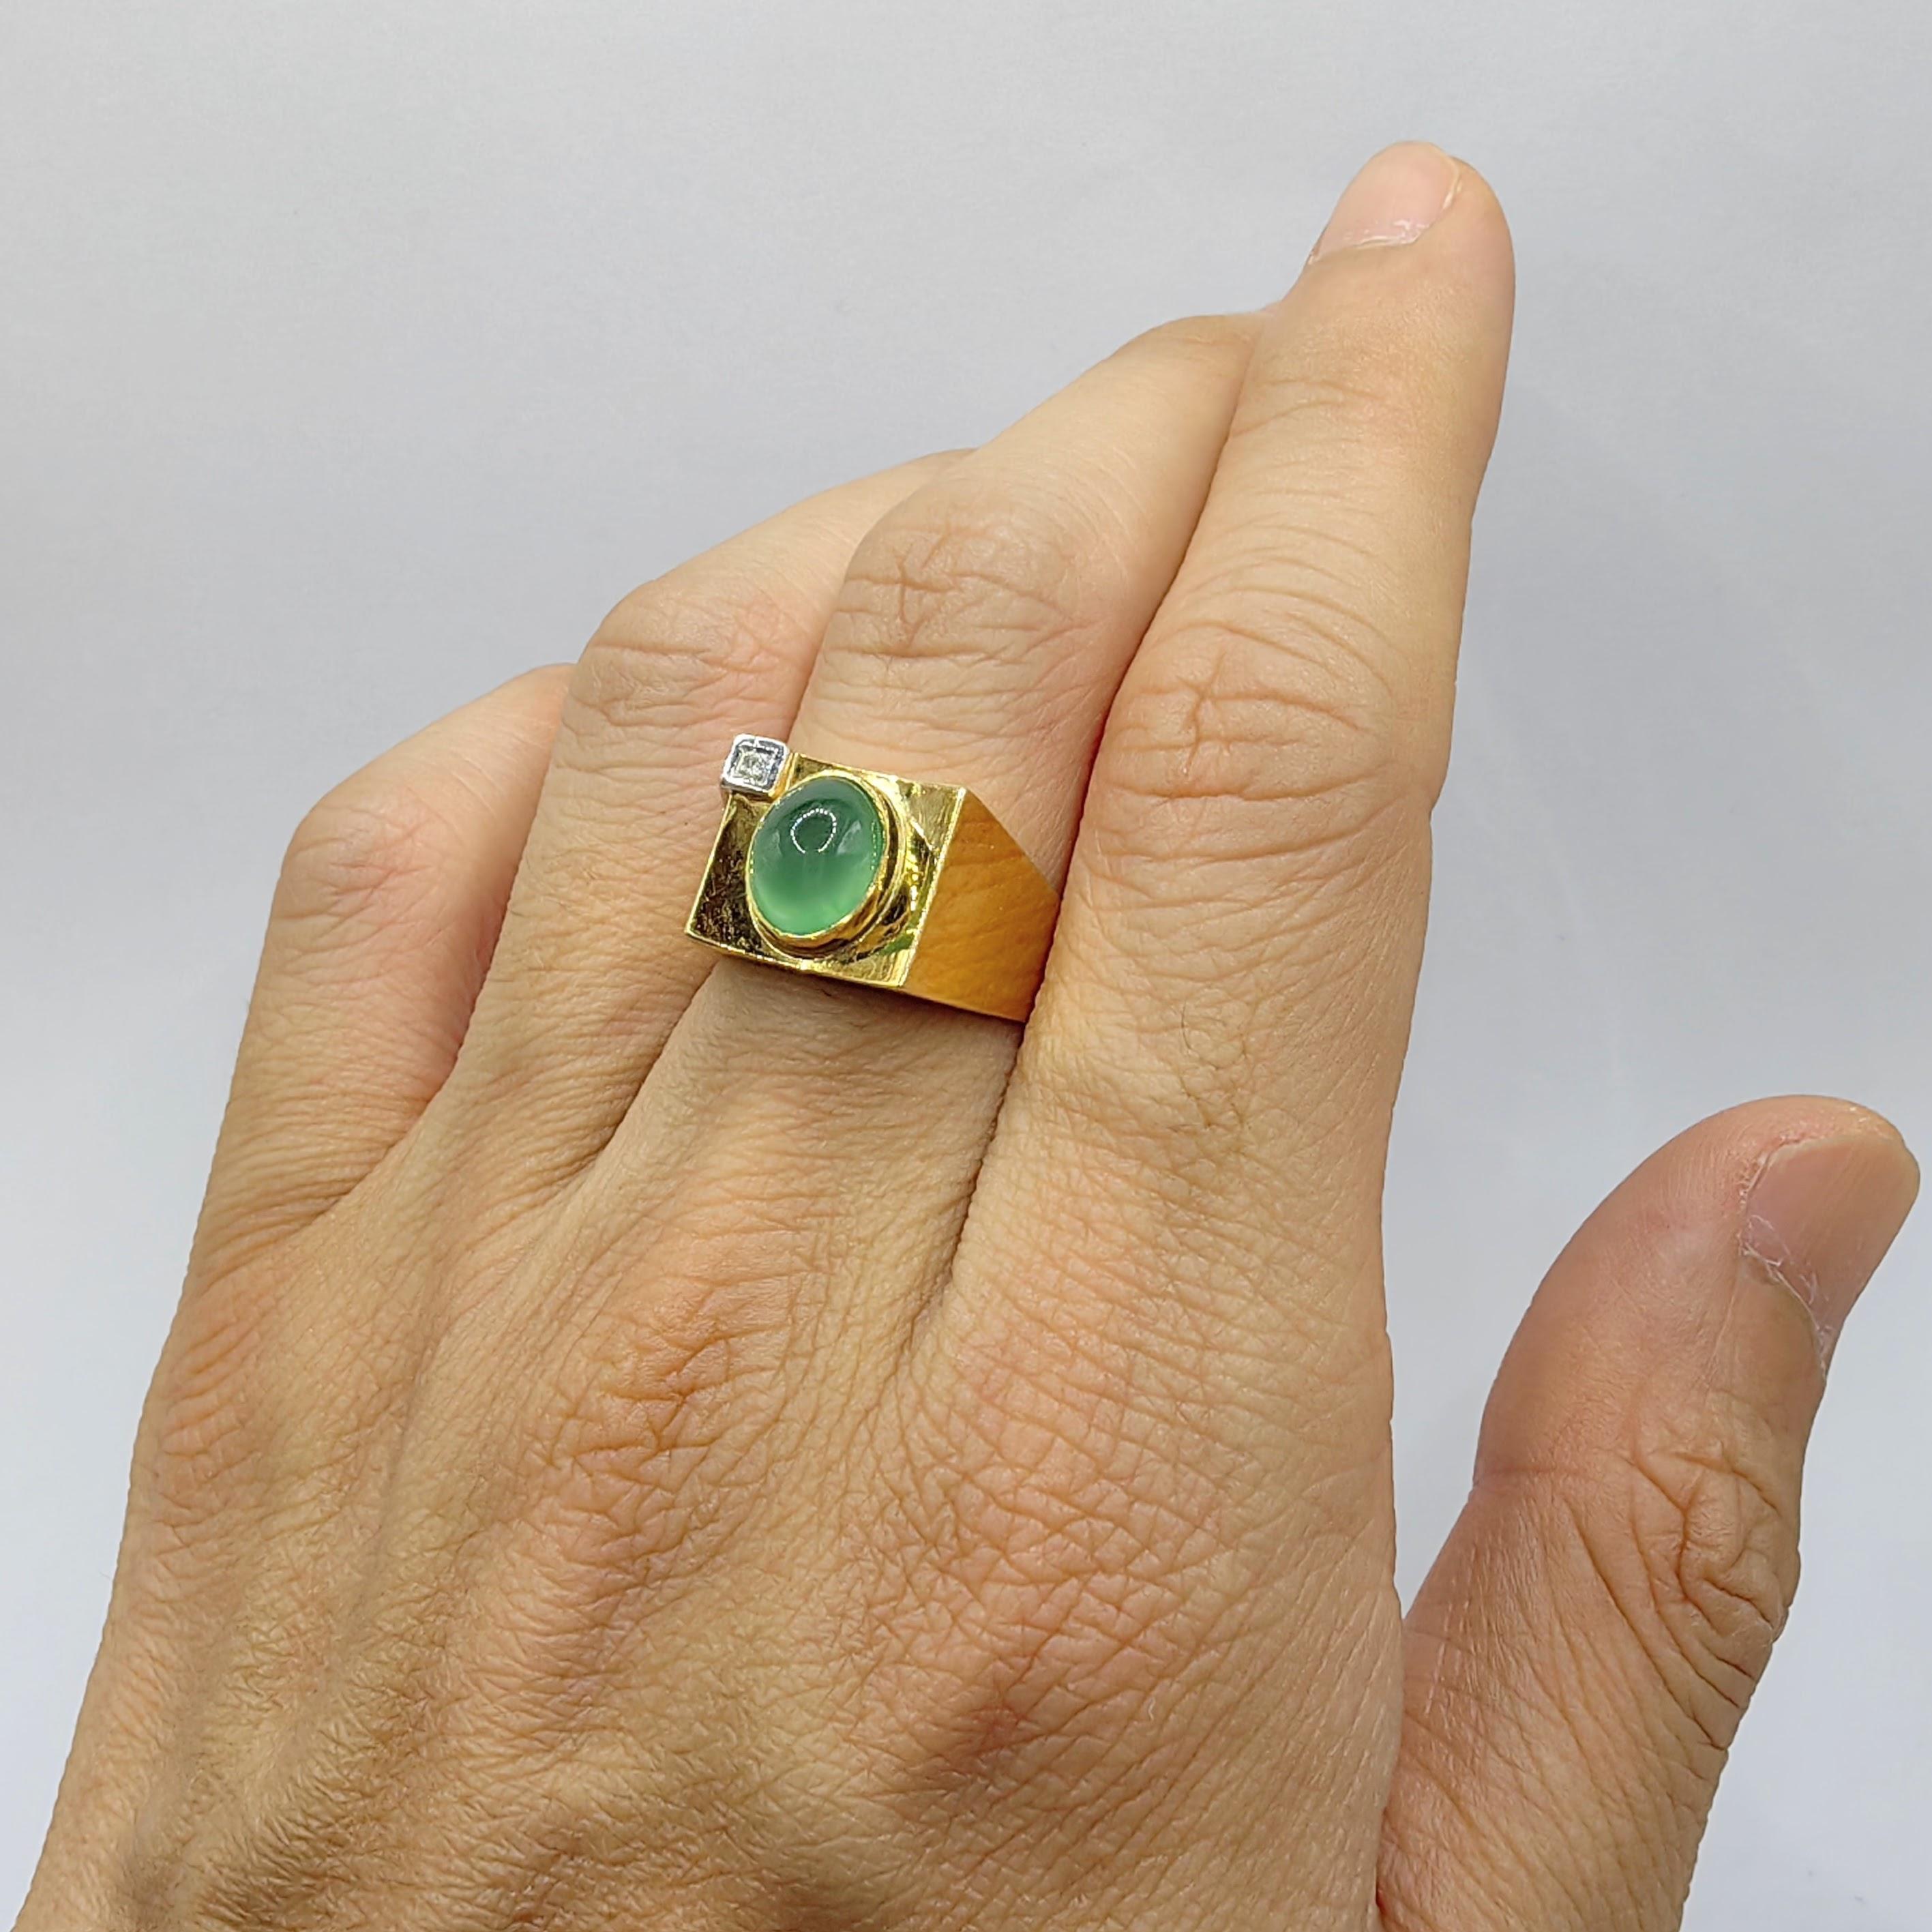 Introducing our Vintage Icy Light Apple Green Jadeite Jade Diamond Ring in 14K Two-tone Gold, a captivating piece that exudes elegance and showcases the natural beauty of jadeite jade. This exquisite ring features an icy light apple green cabochon